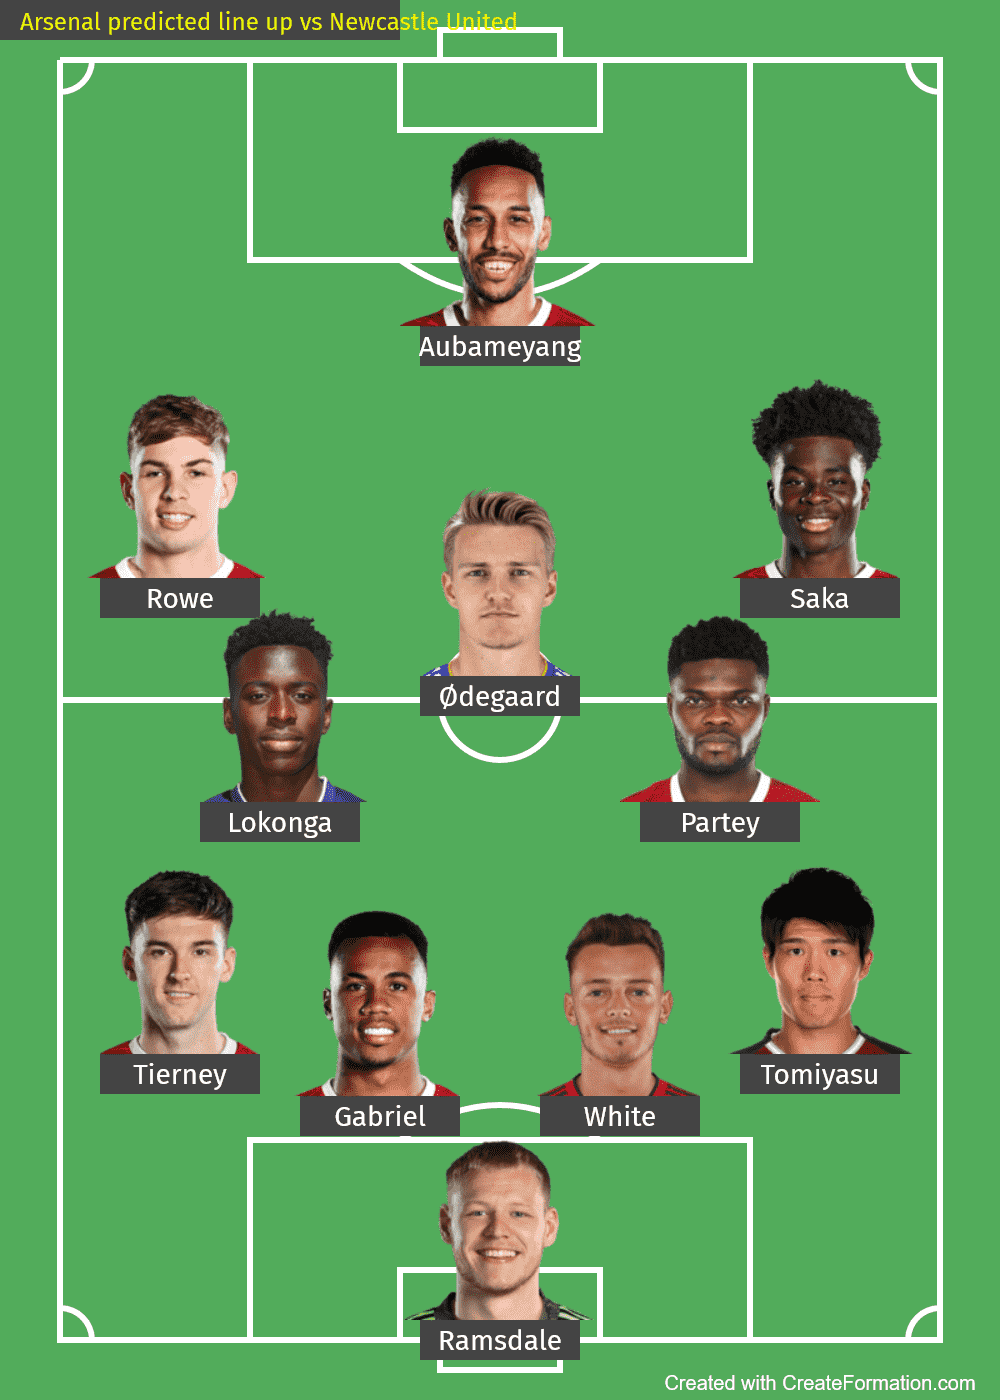 Arsenal predicted line up vs Newcastle United-2021